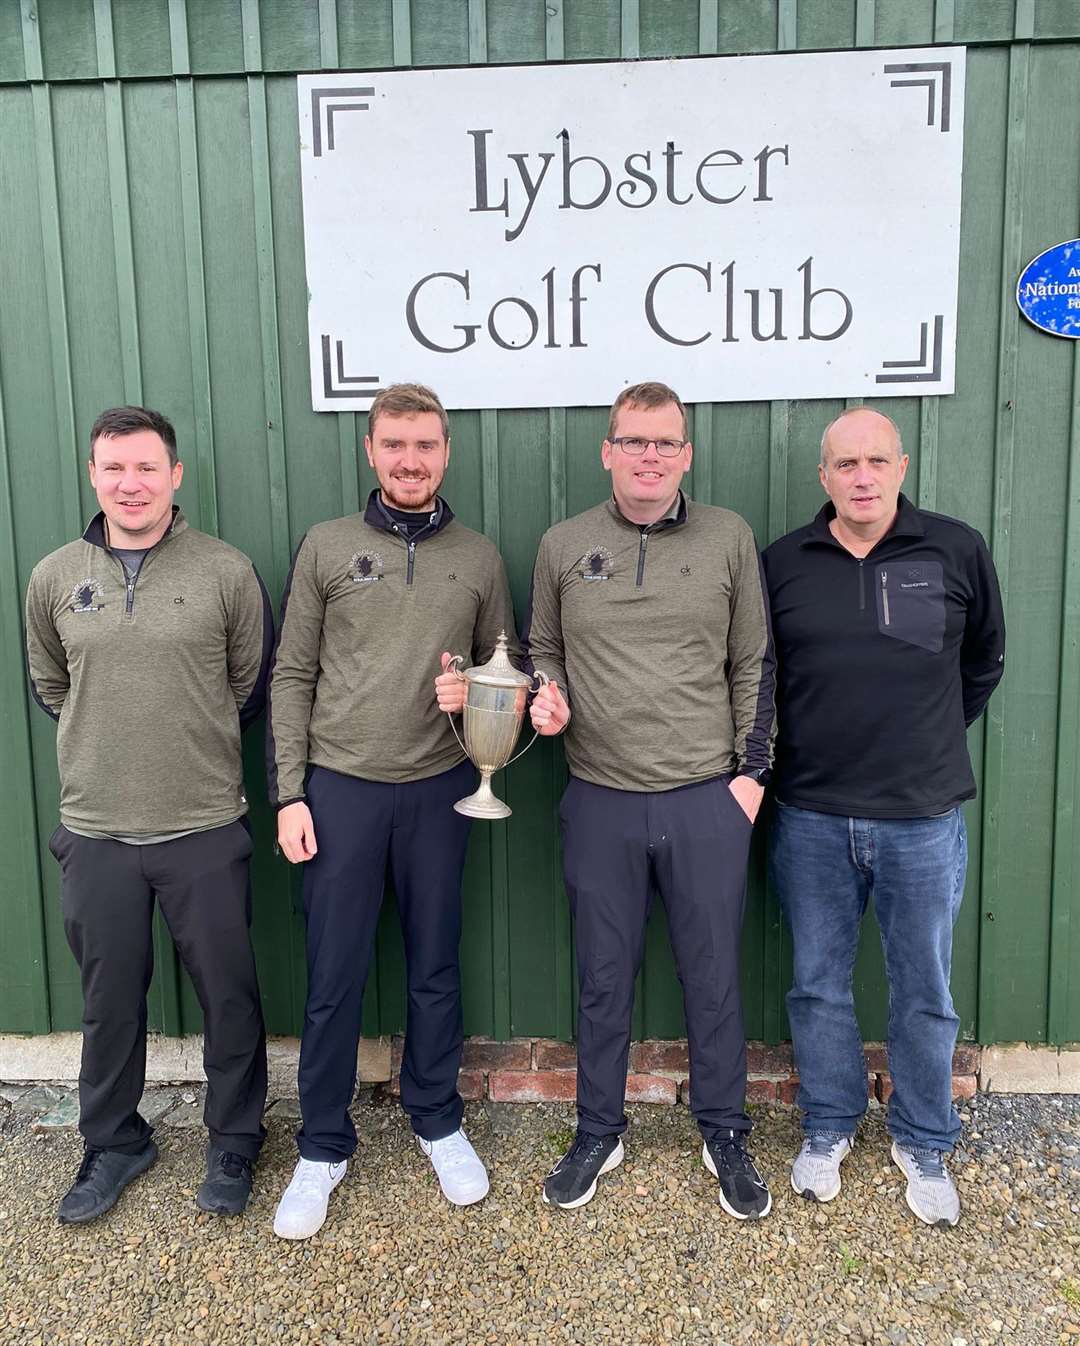 The winning Ulbster Cup team, Reay ‘A’ – (from left) Michael Smith, Tom Ross, Brent Munro and Andy Mowat.